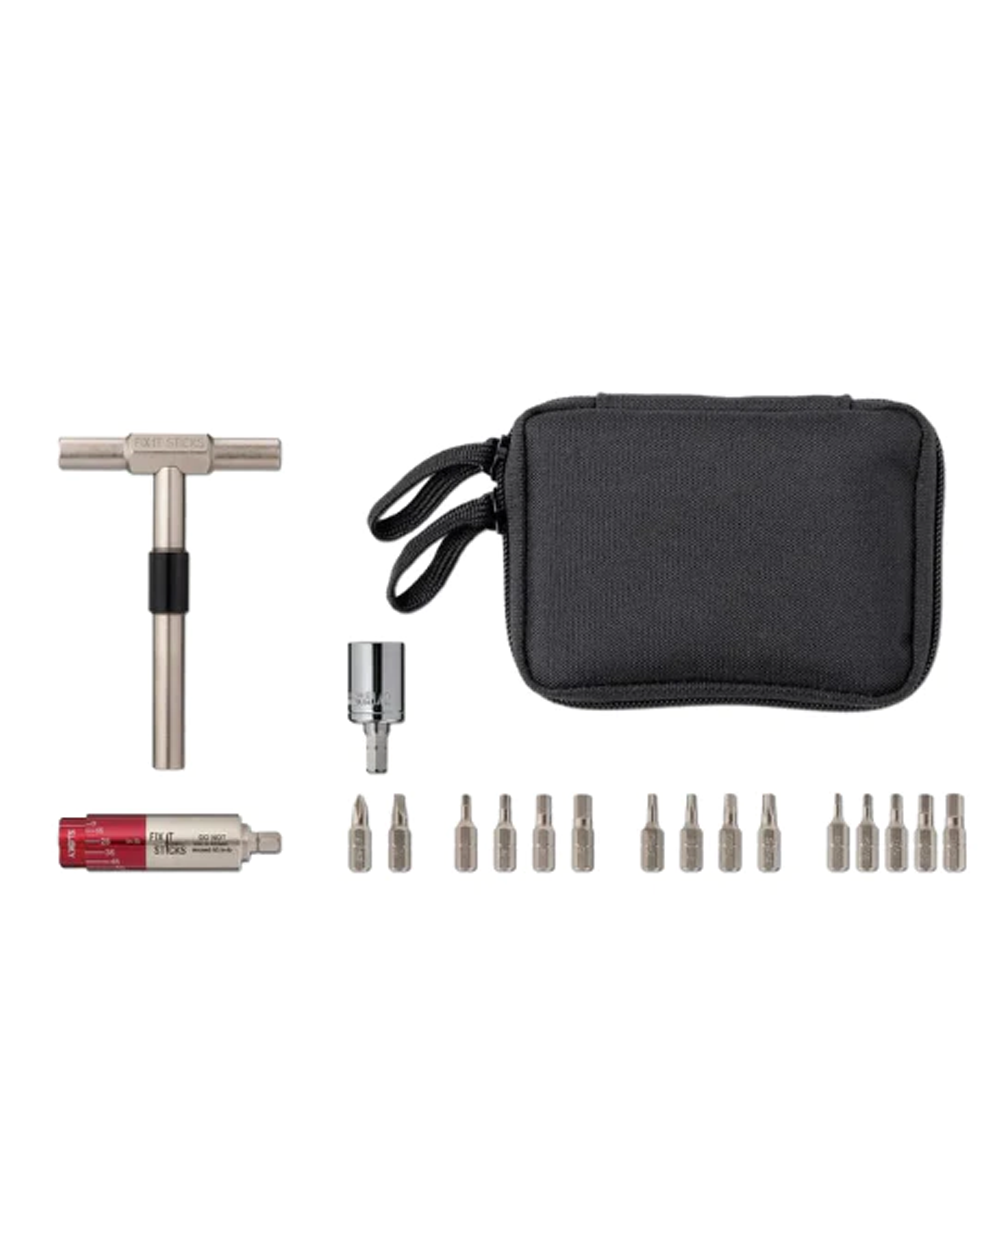 Fix It Sticks Rifle and Optics Toolkit with All-in-One Torque Driver